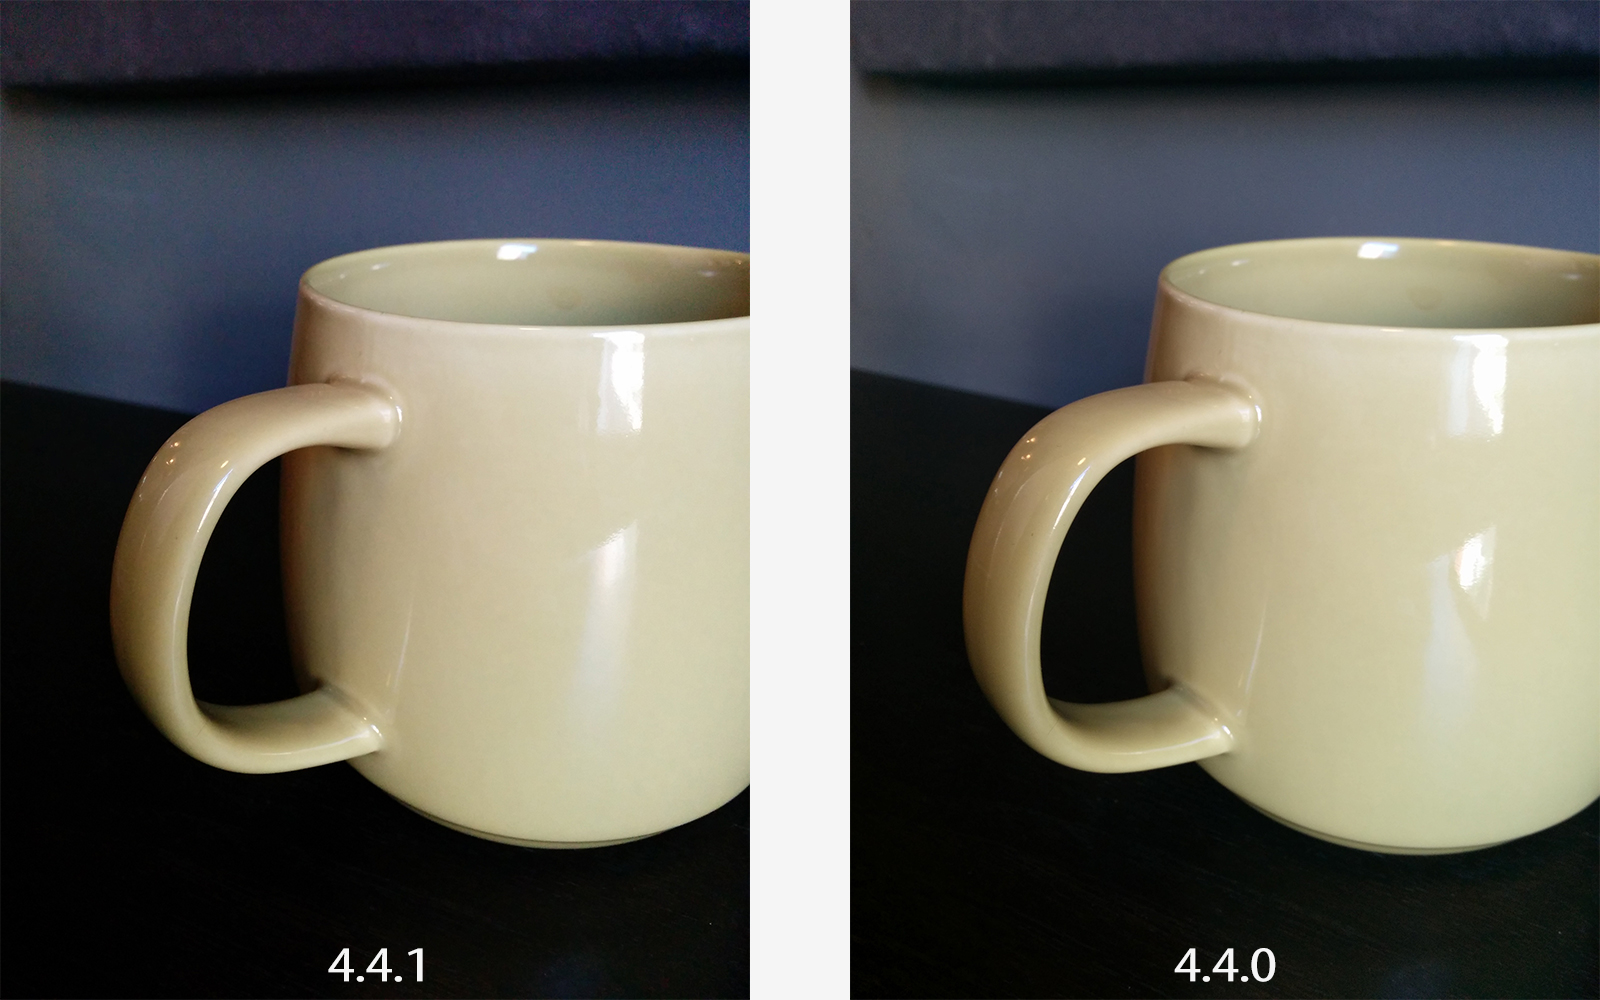 Nexus 5 Camera With Android 4.4.1 Test Shots: A Speed Focus Machine